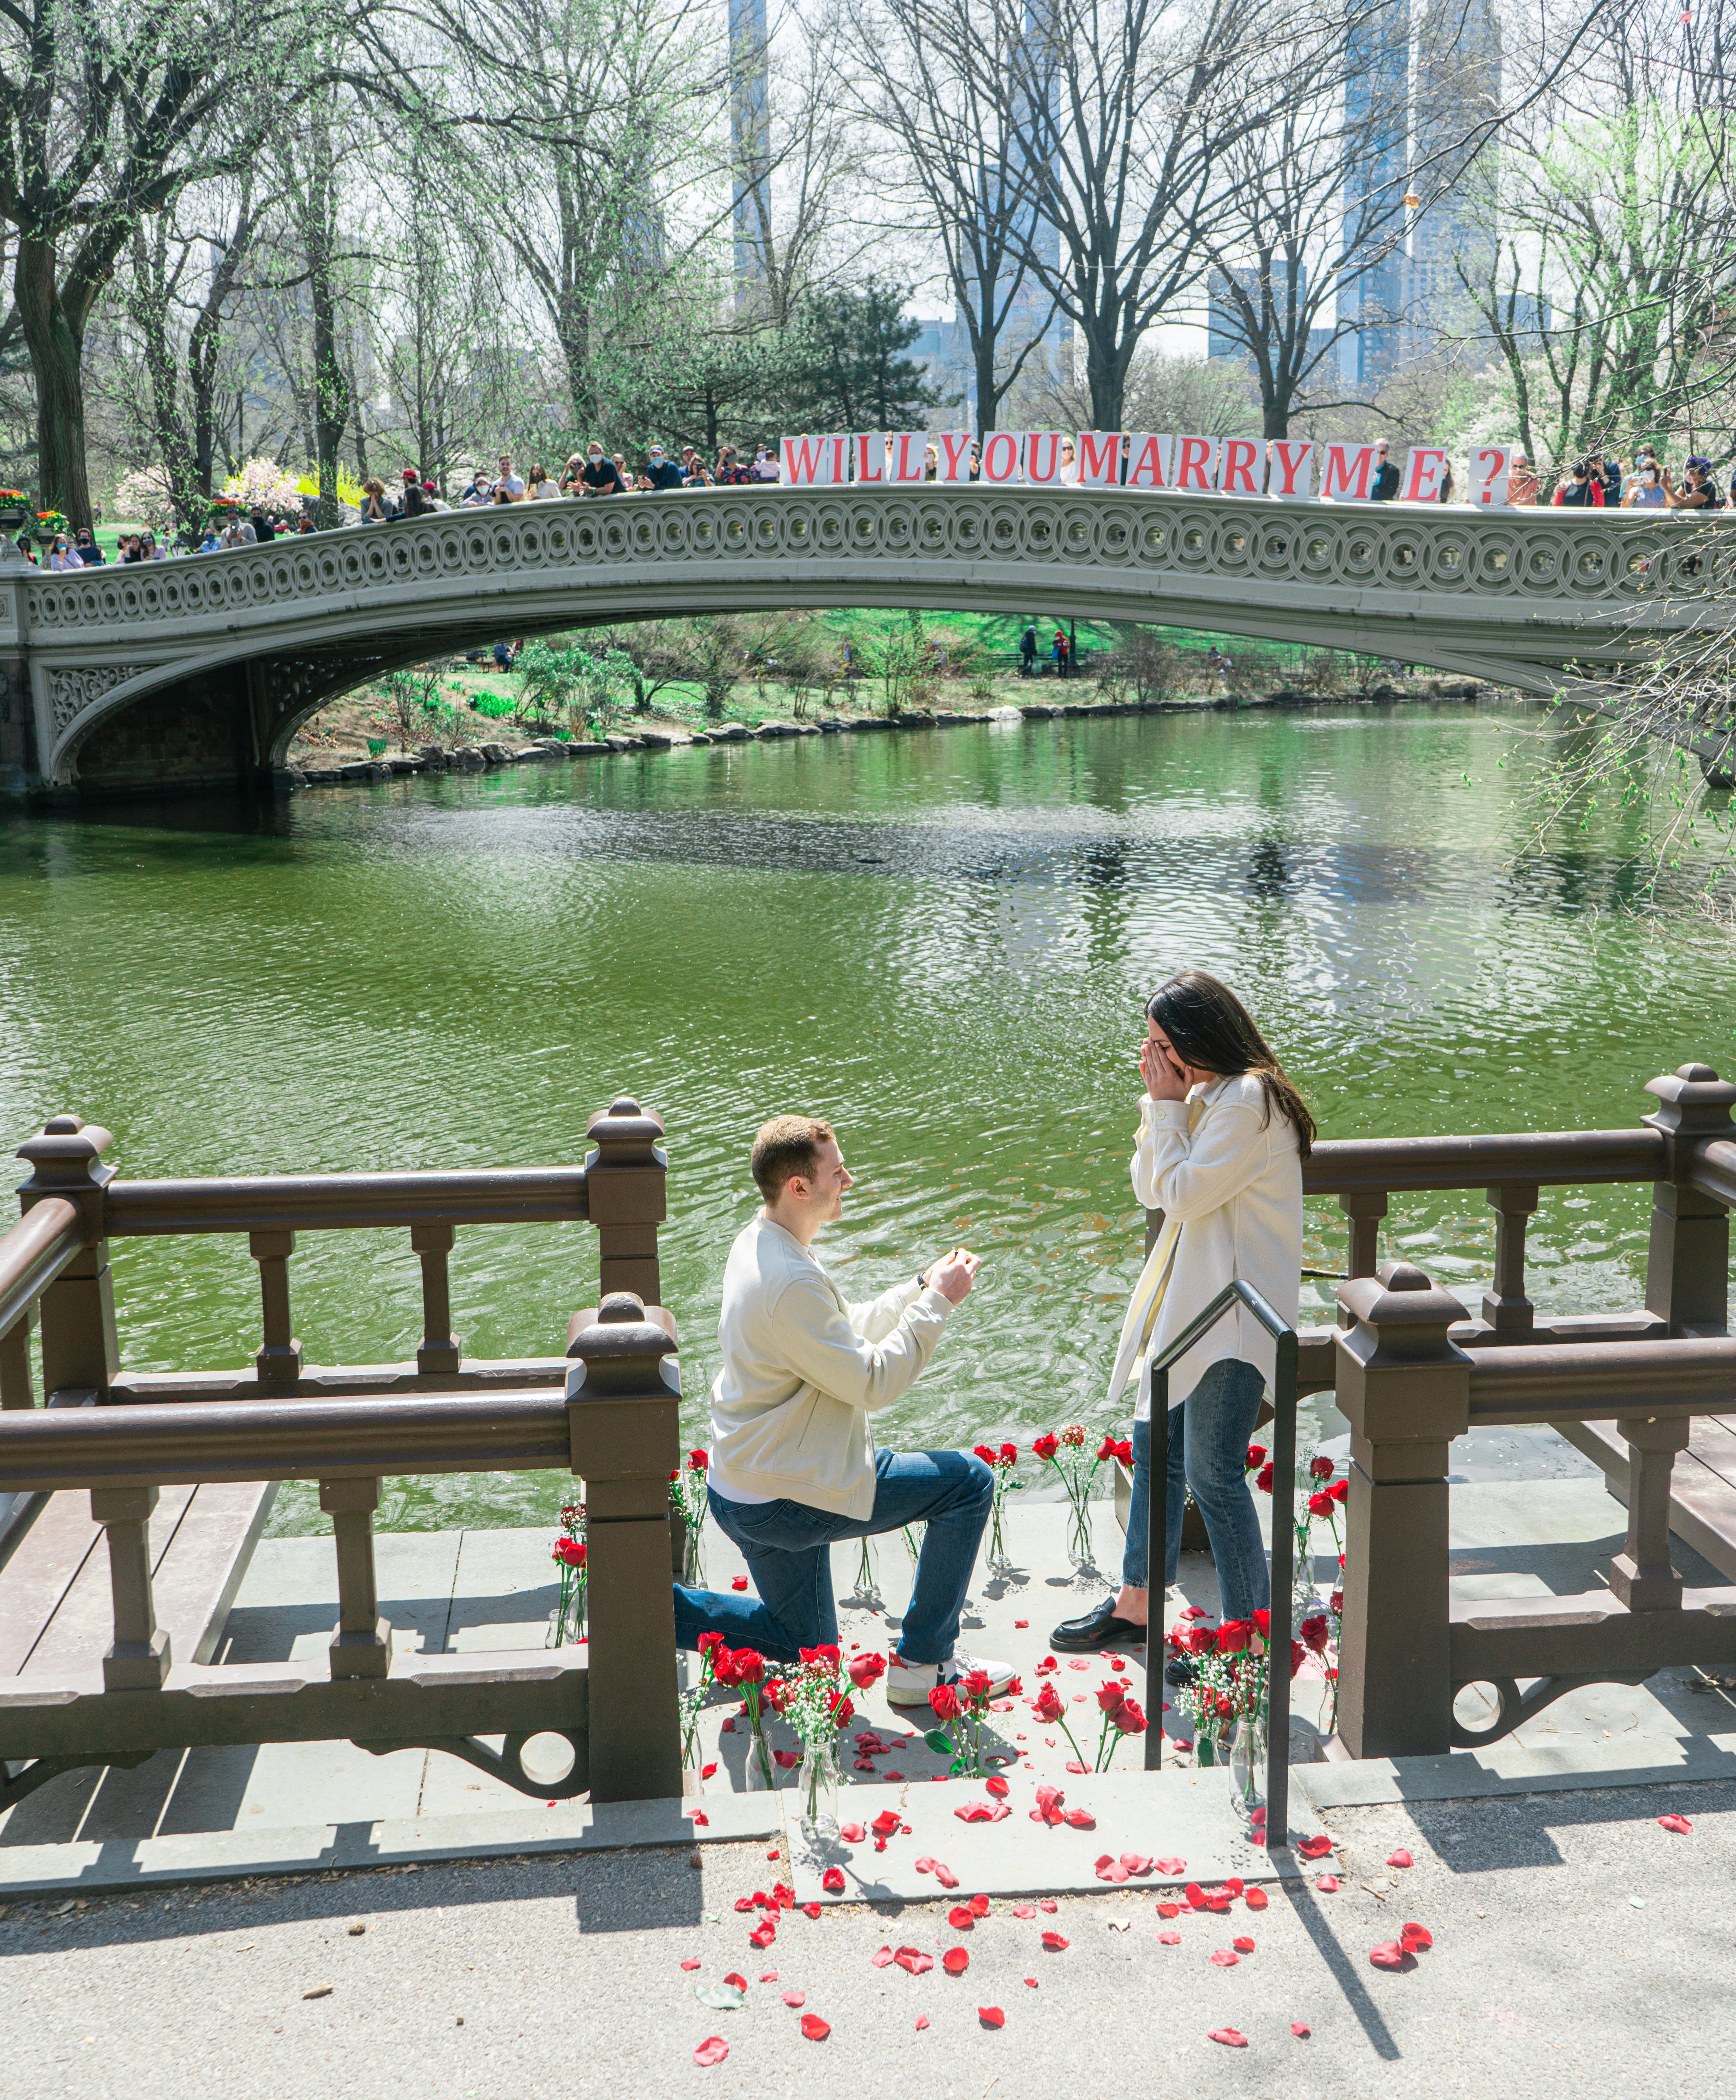 A man elaborately proposes to a woman next to a river with red roses a sign that asks her the big question | Photo: Unsplash/Dylan Sauerwein 